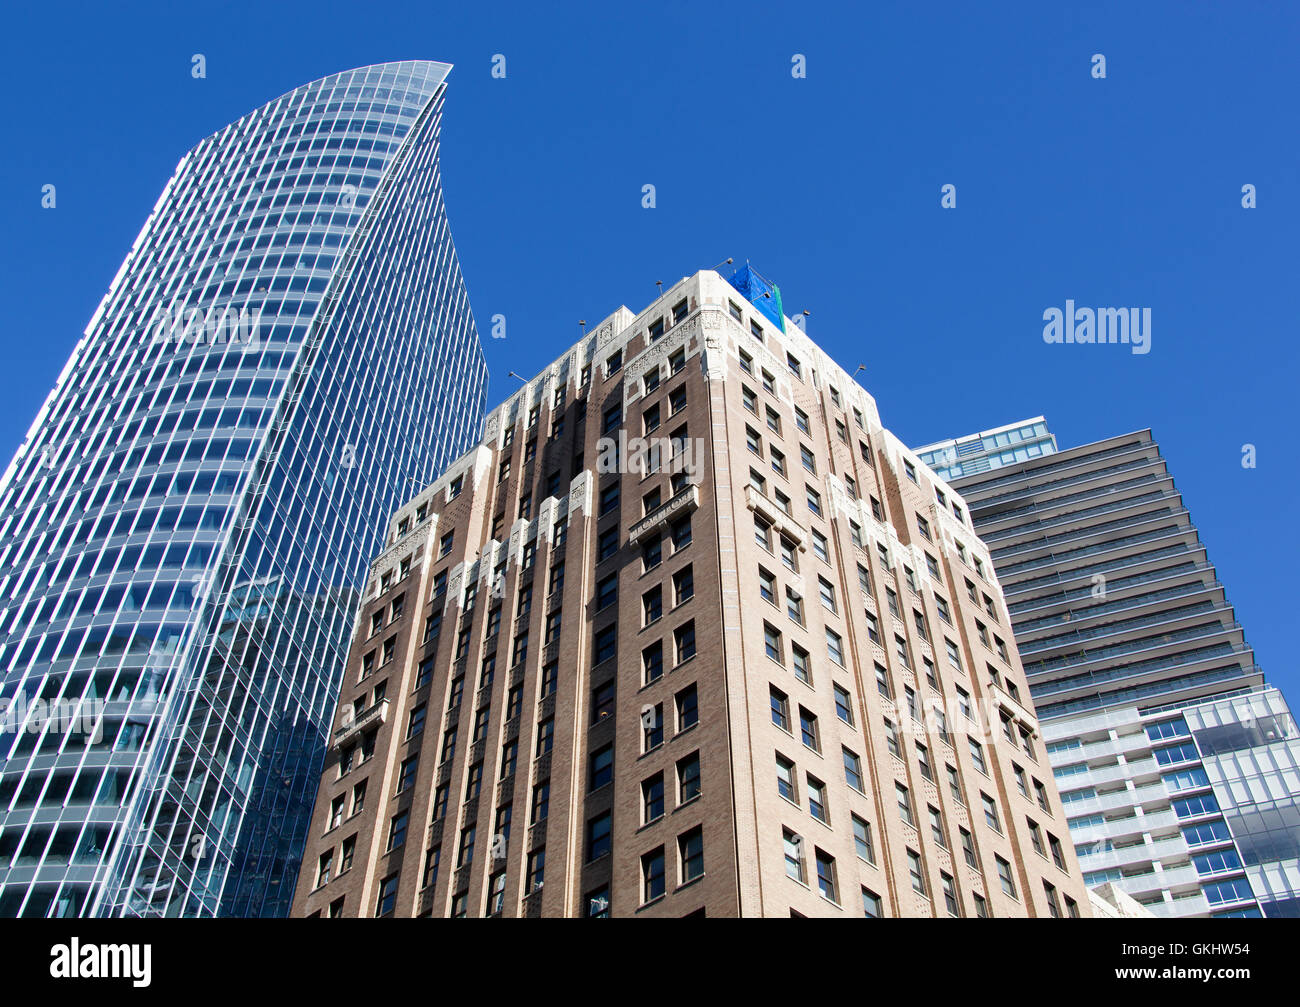 Old and modern style buildings in Vancouver downtown (Canada).l Stock Photo